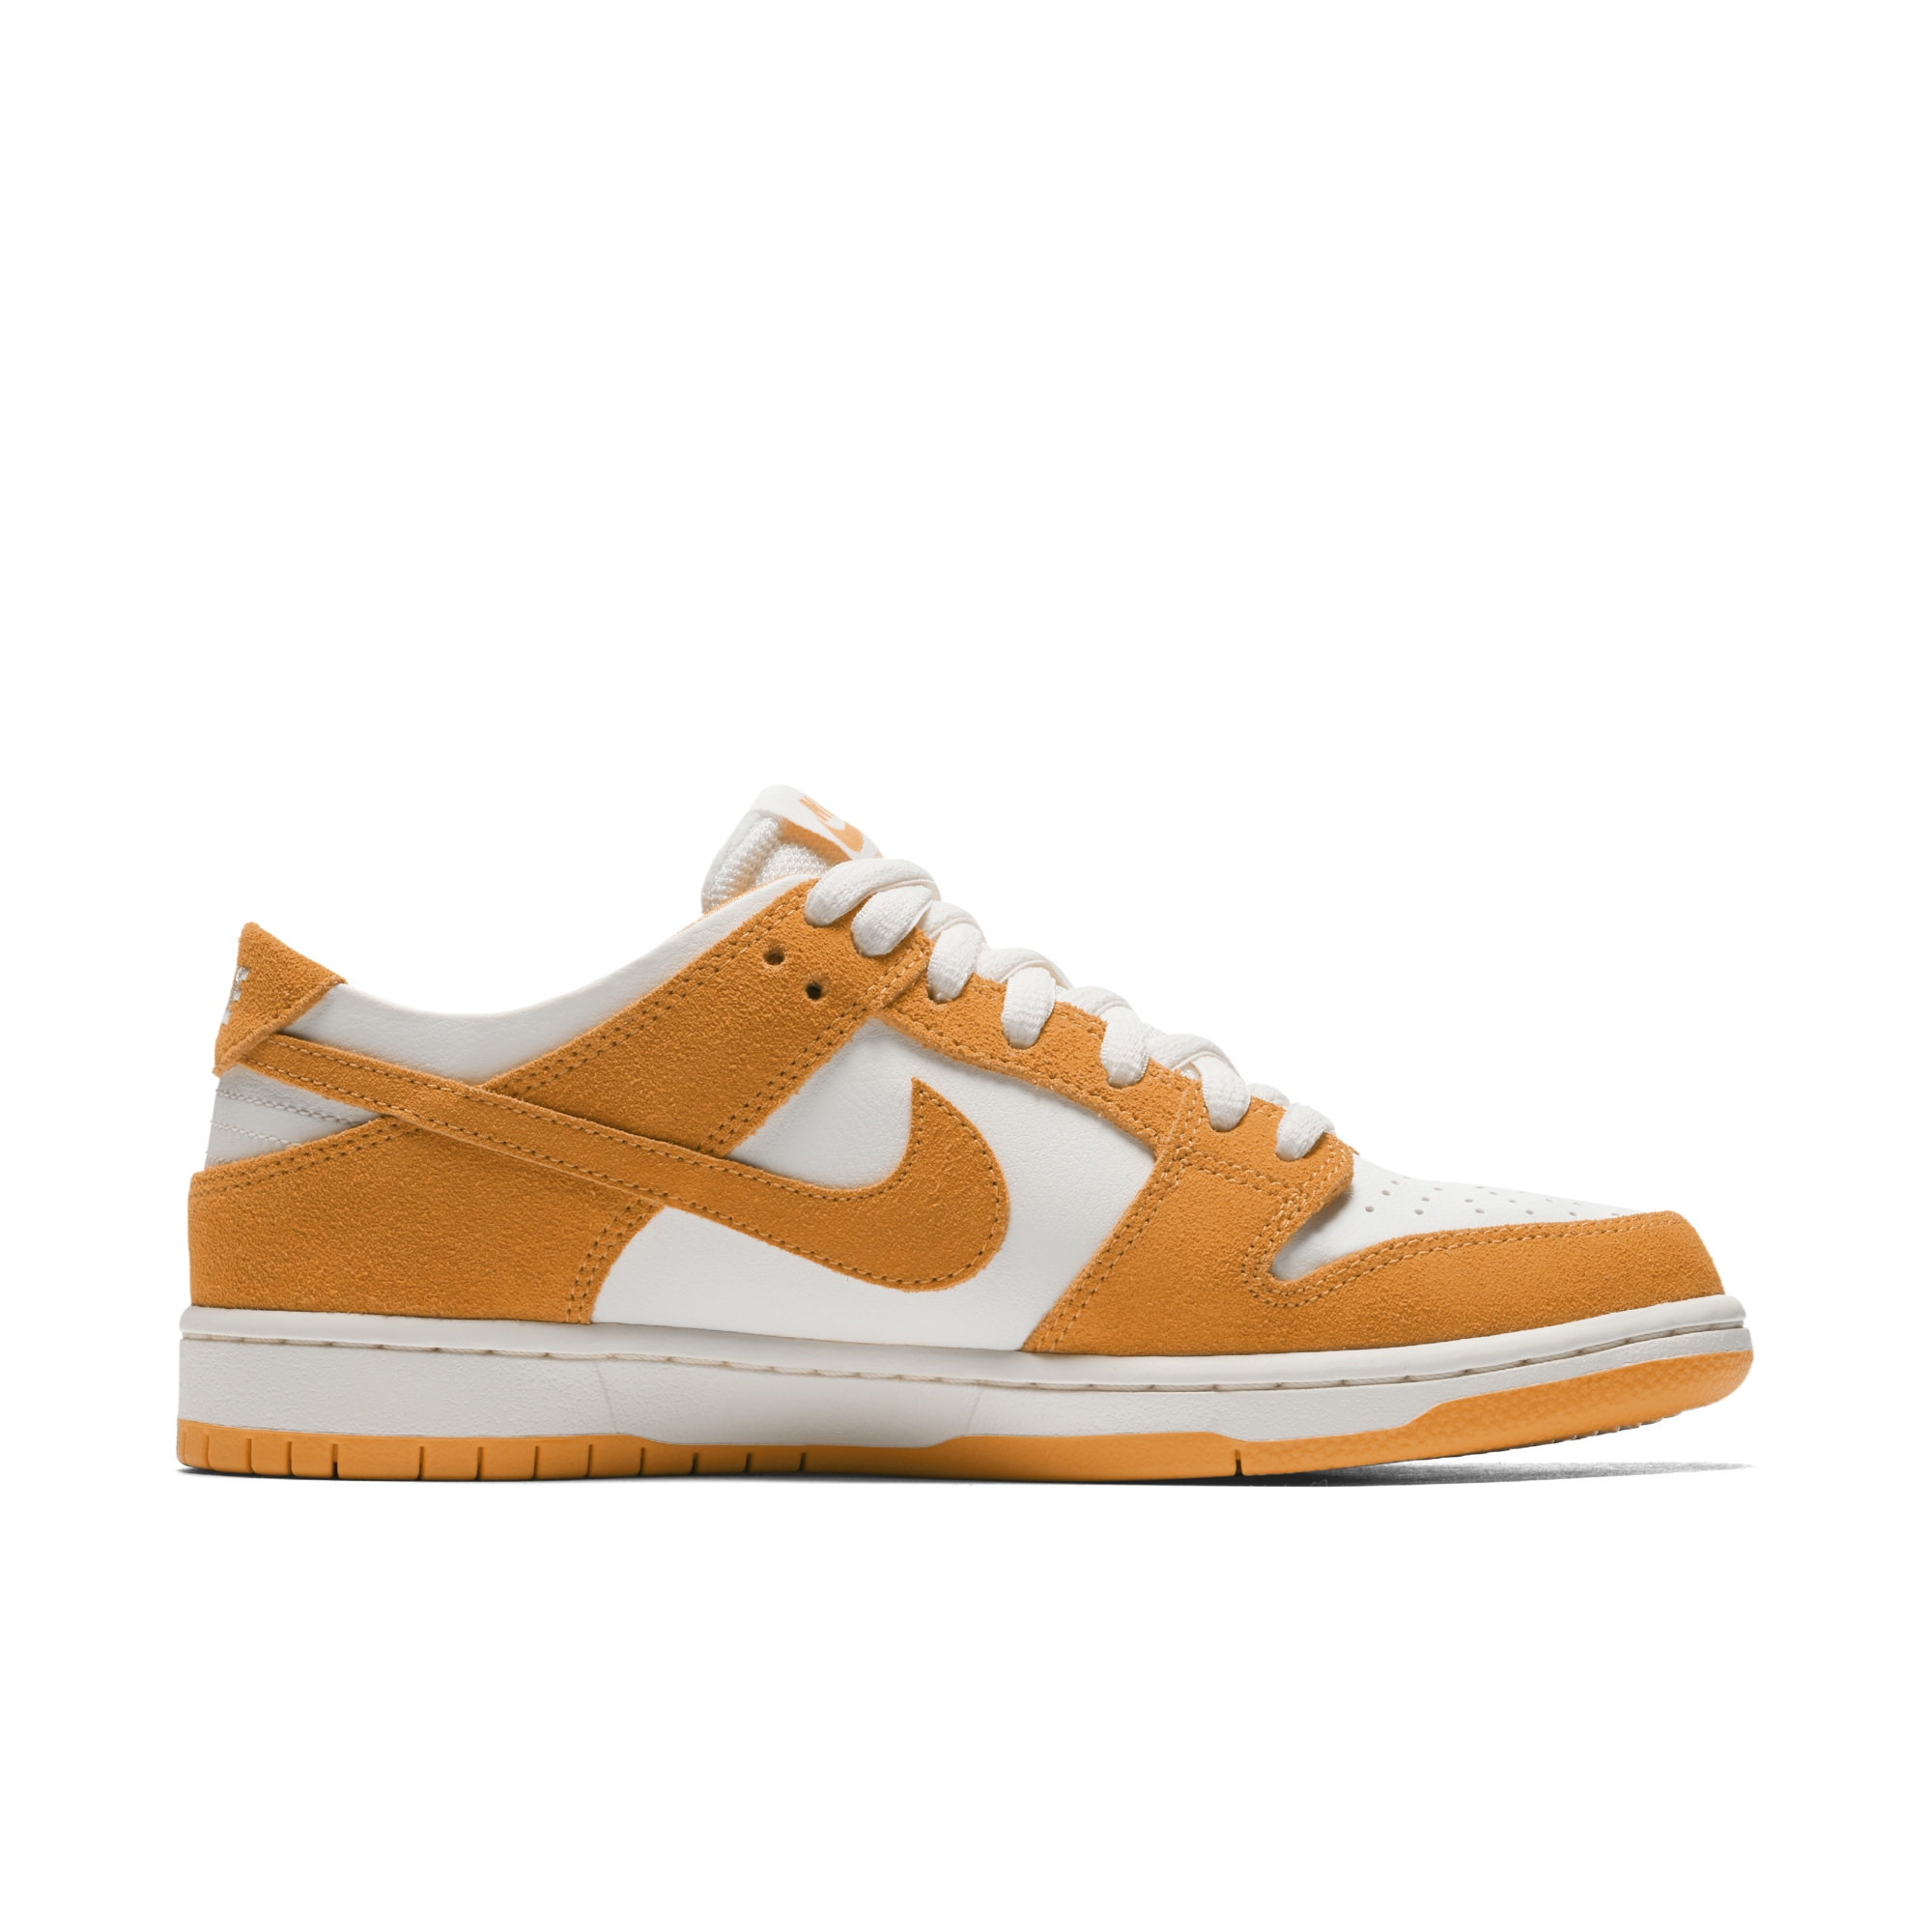 Nike Dunk Orange | Nike | Release Sneaker Prices & Collaborations